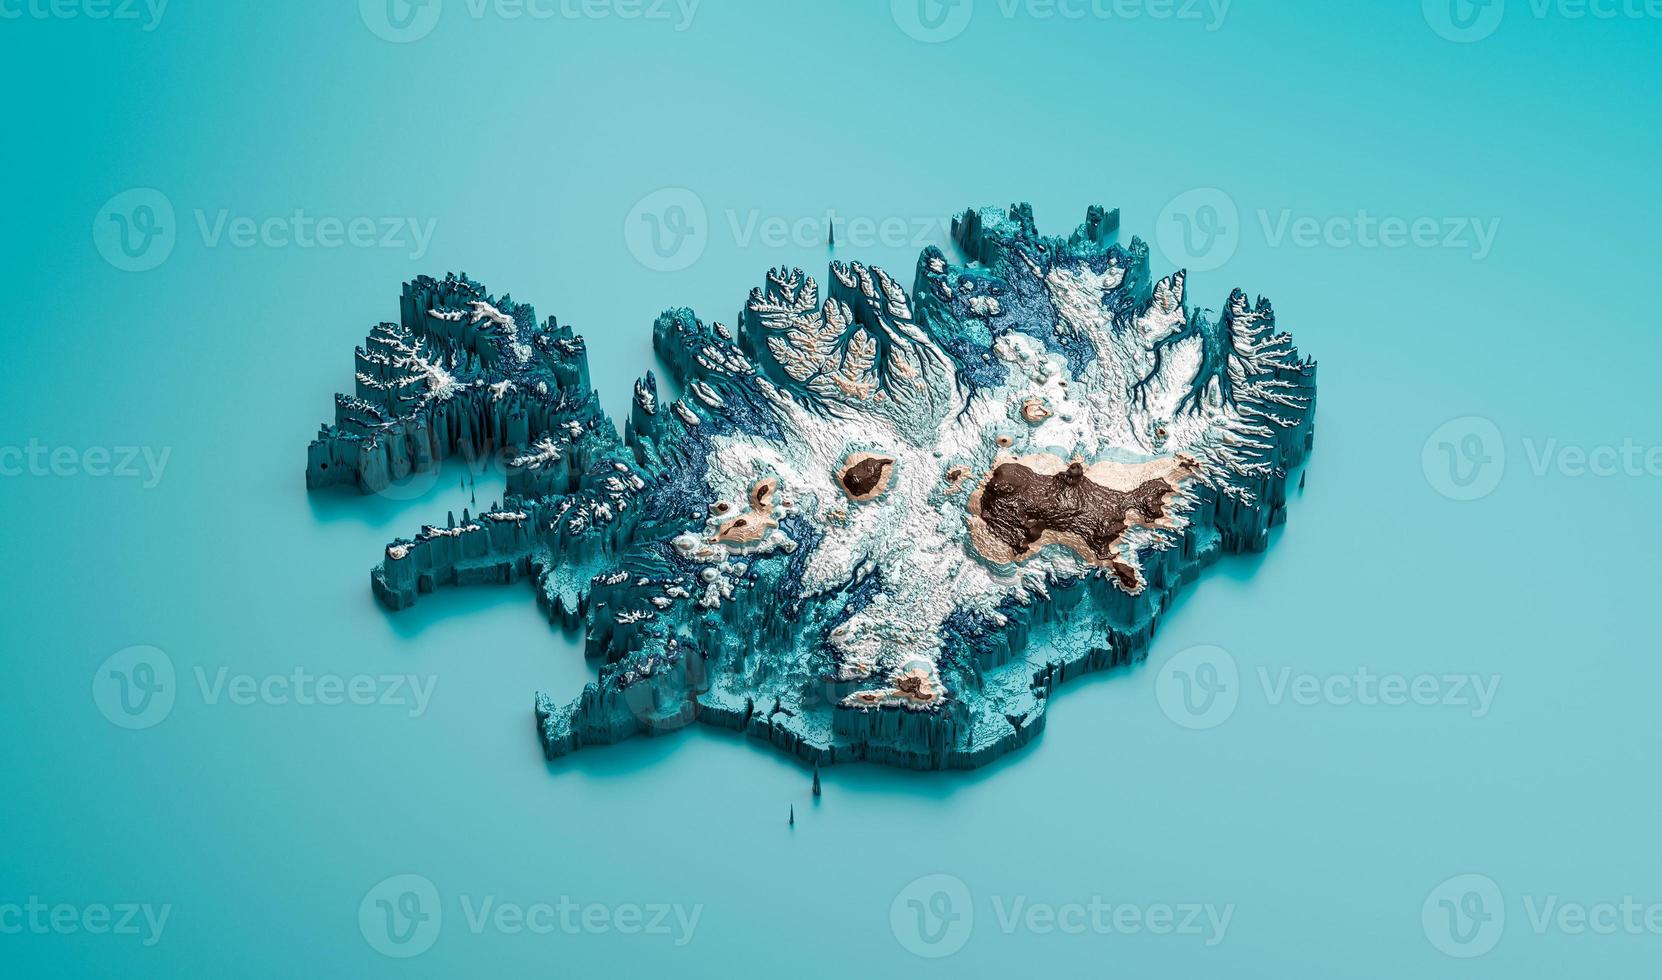 Topographic Iceland Map Hypsometric Iceland Elevation tint Spectral Shaded relief map 3d illustration photo